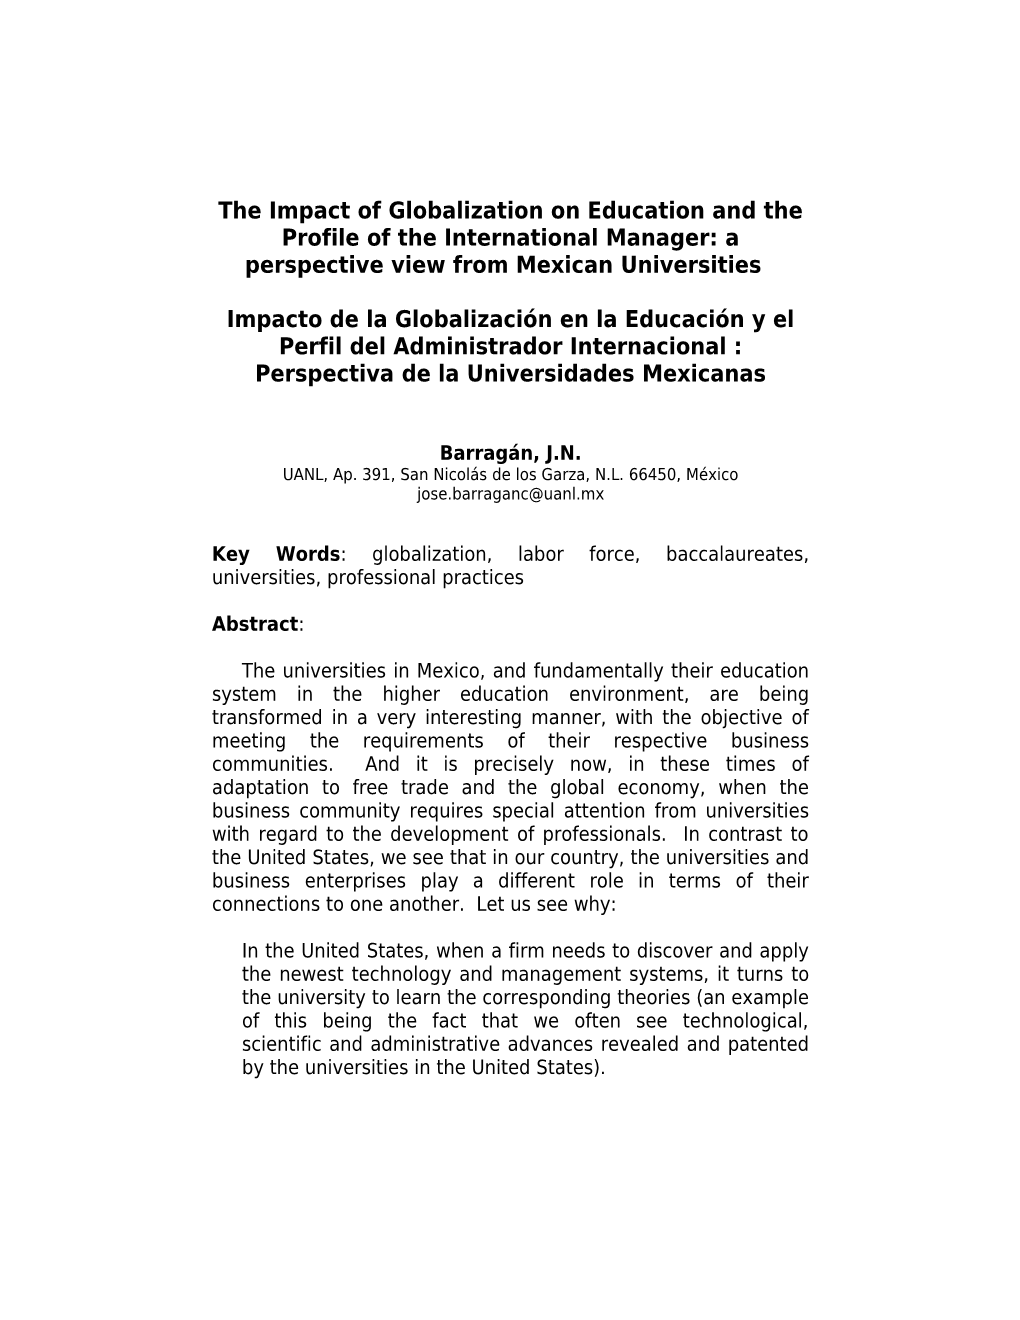 The Impact of Globalization on Education and the Profile of the International Manager